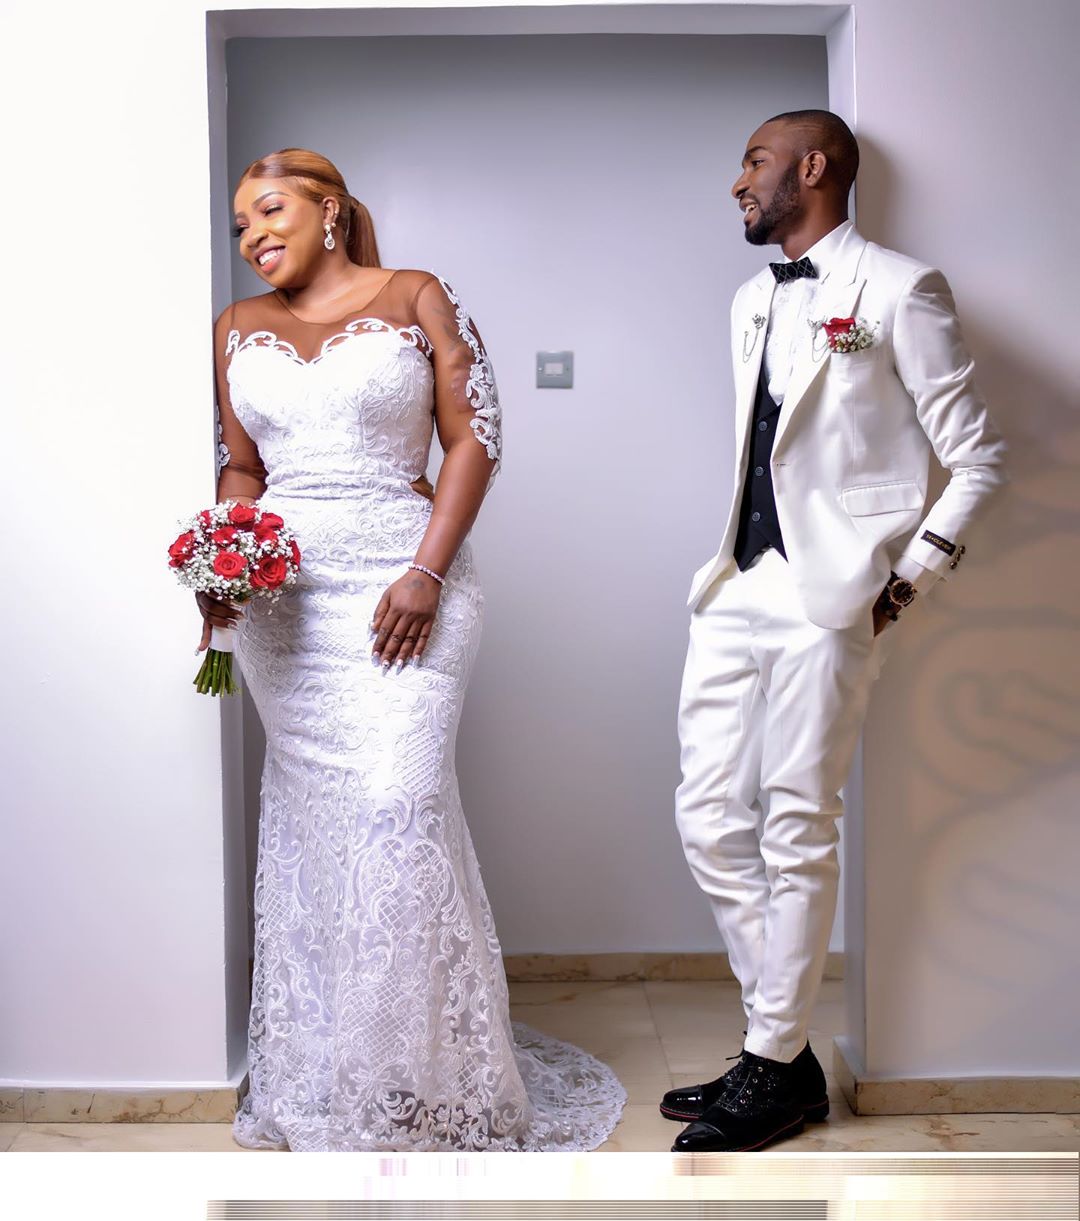 They said he’s not my type, yet we got married’ – Anita Joseph to those mocking her choice of husband (Photos)